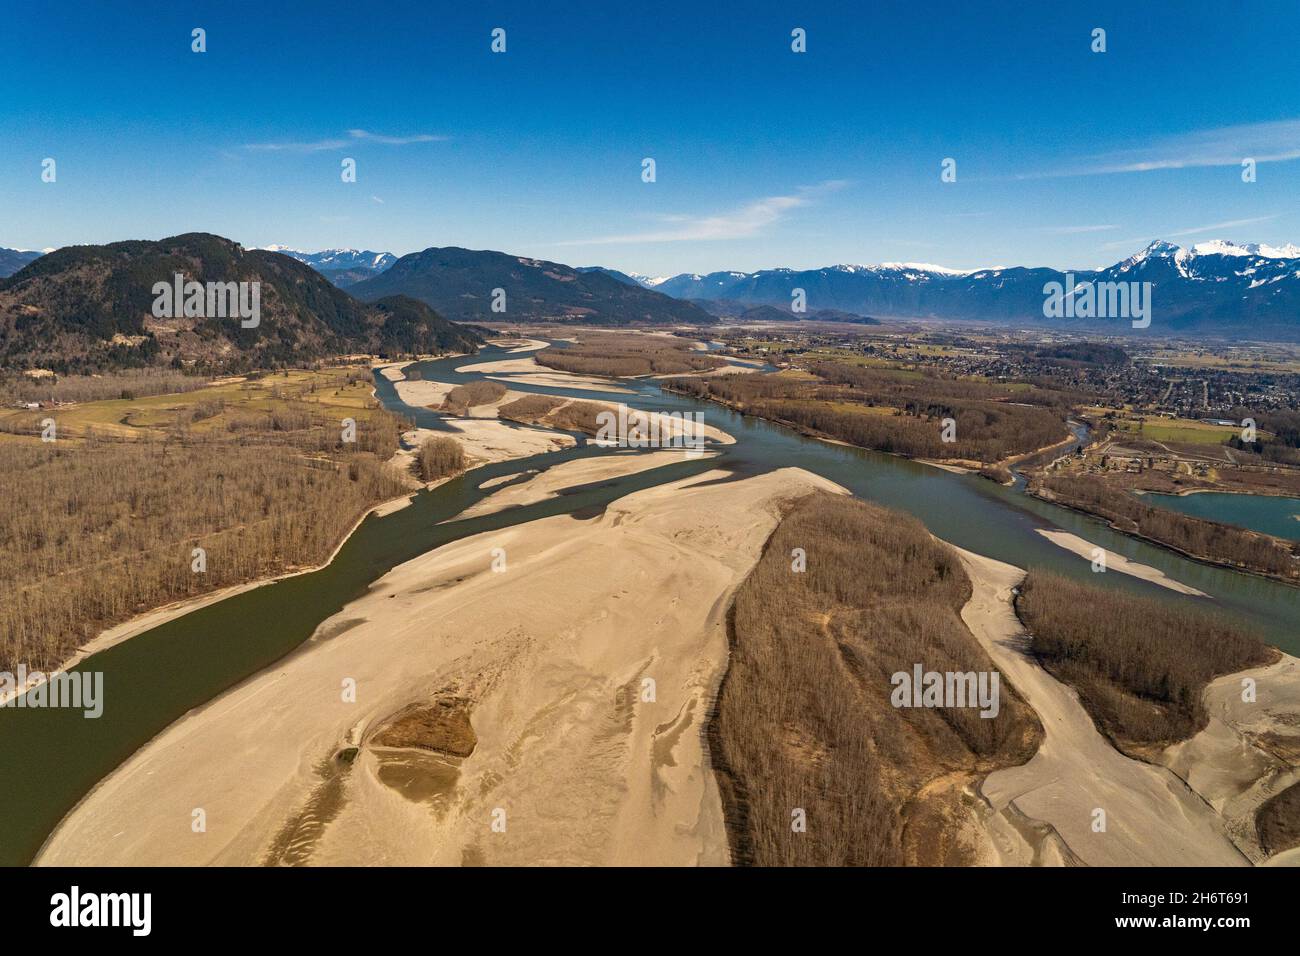 Aerial view of the Fraser River floodplain taken on spring showing low water levels. Stock Photo